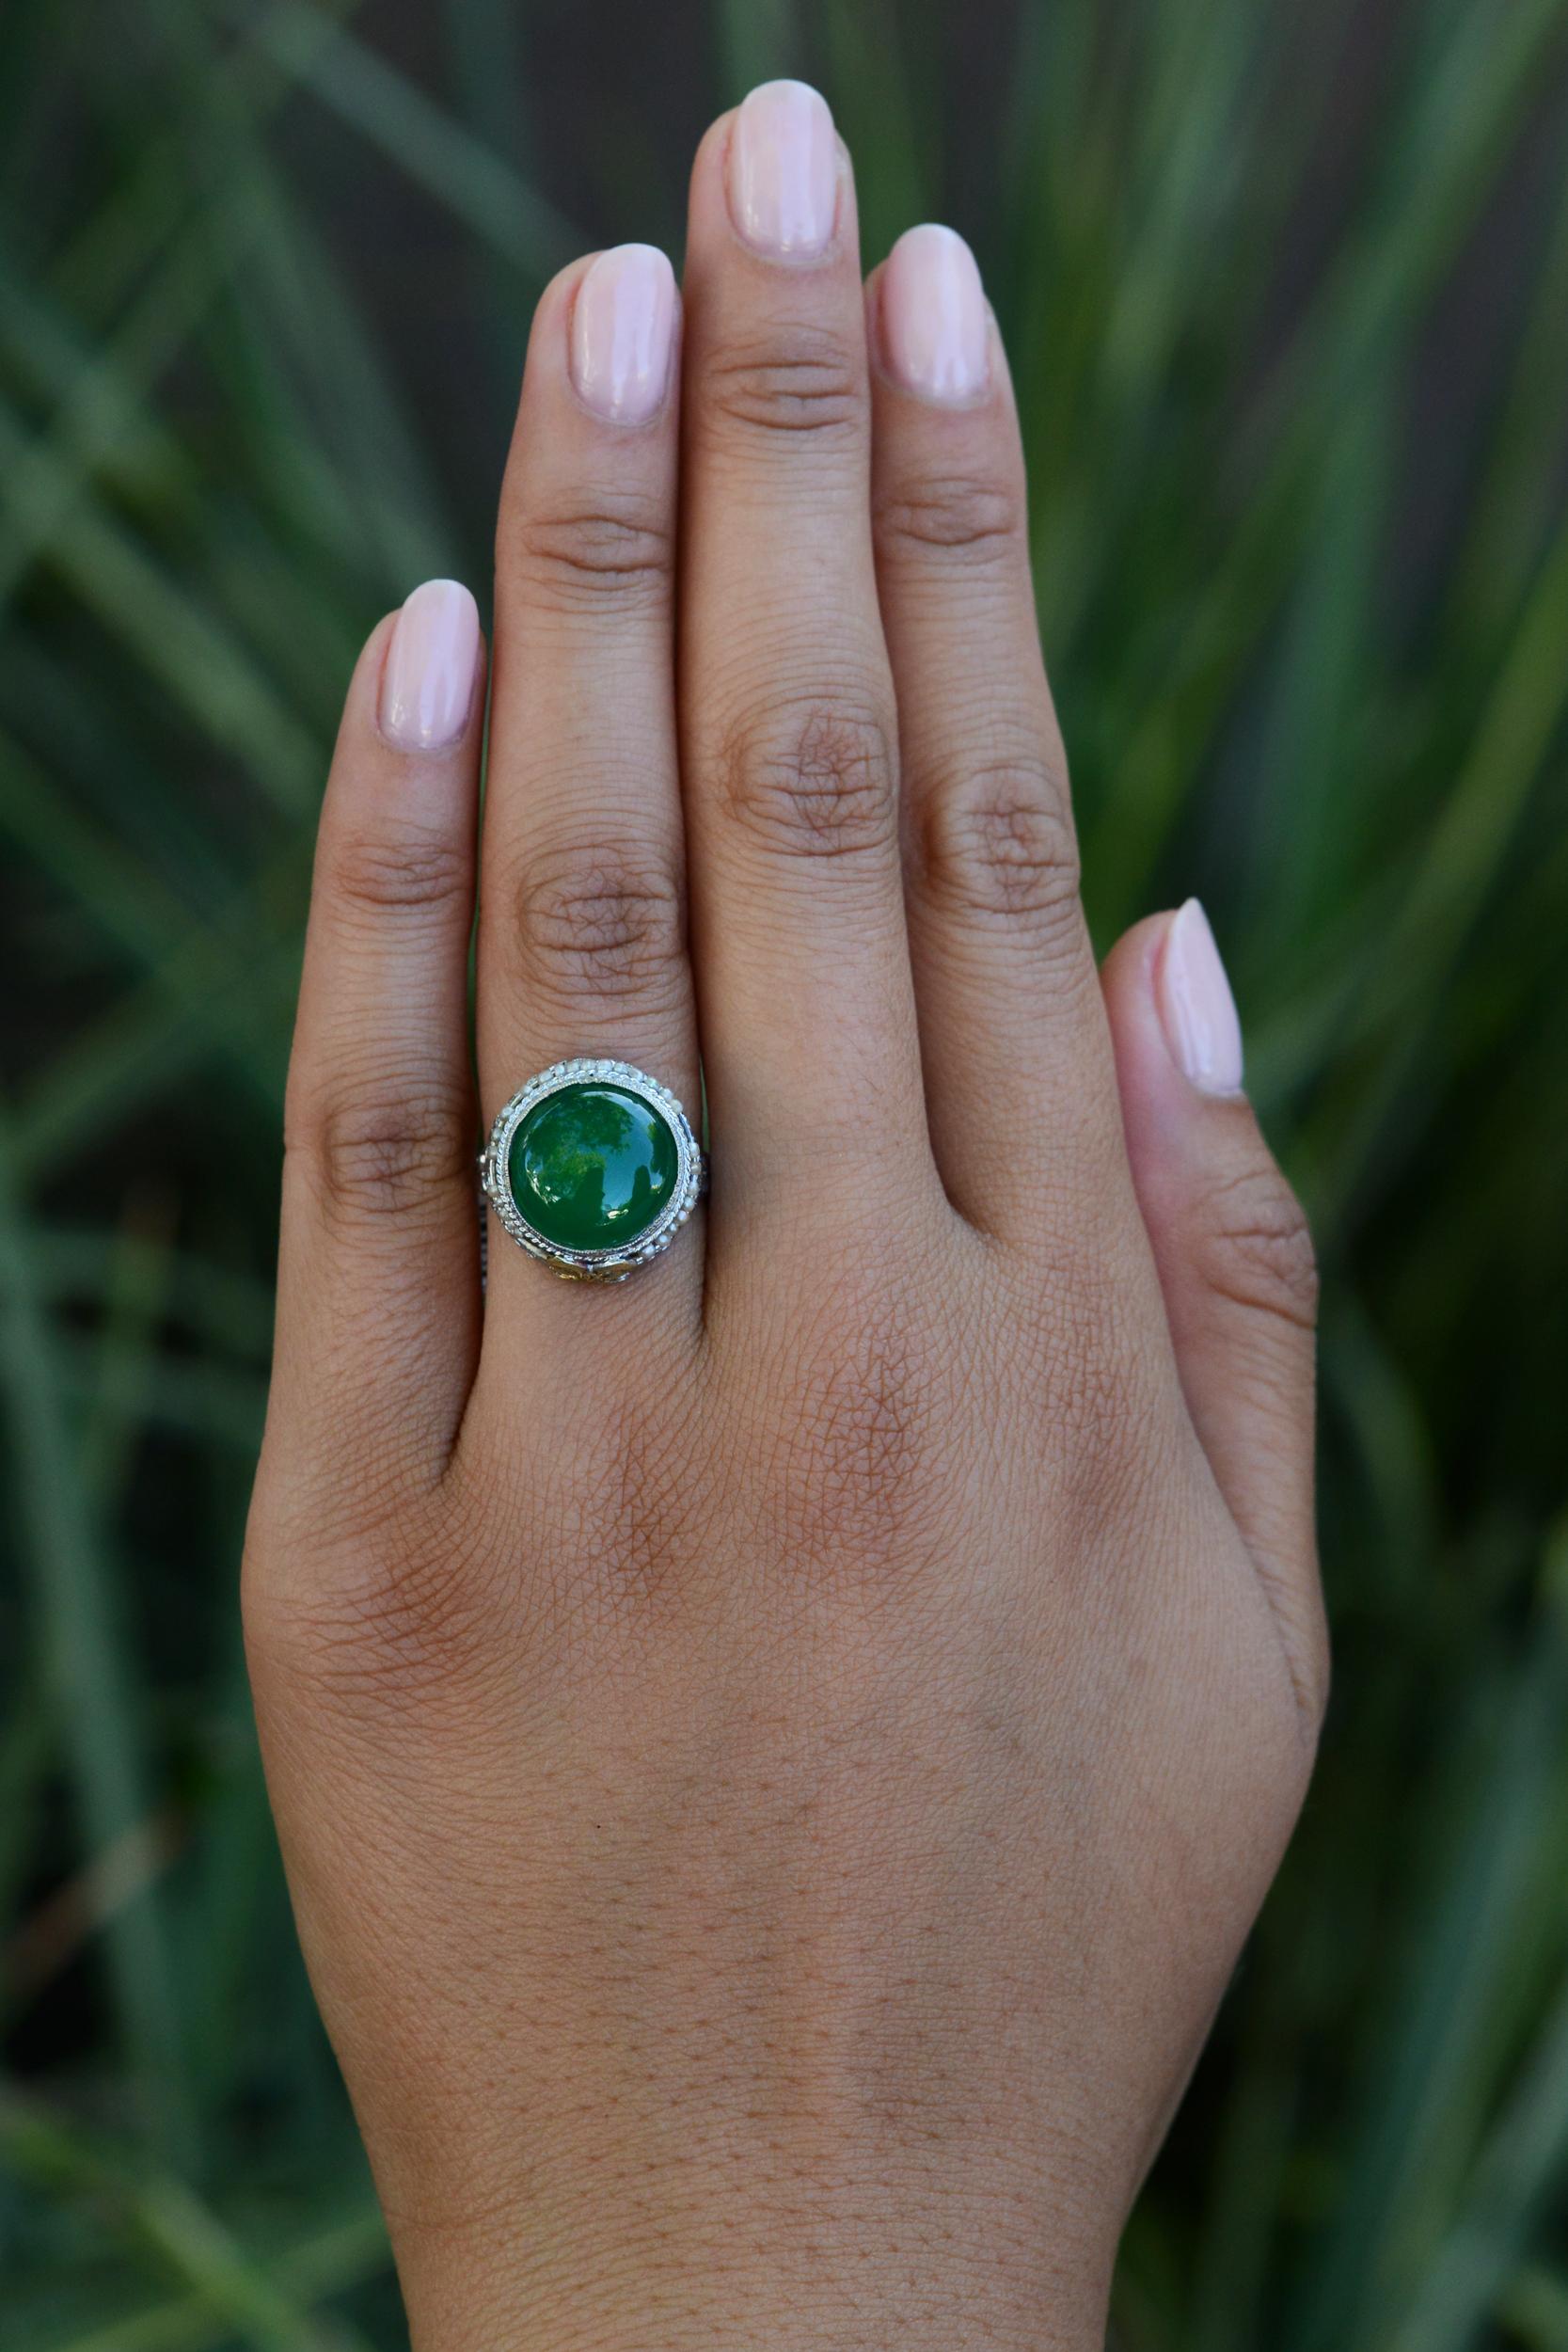 This authentic antique cocktail ring hails from the early 1900s Art Nouveau period. The captivating Chrysoprase gemstone weighs an impressive 4 carats, and due to its phenomenal color it does not utilize backing or glue. Expertly crafted with 14